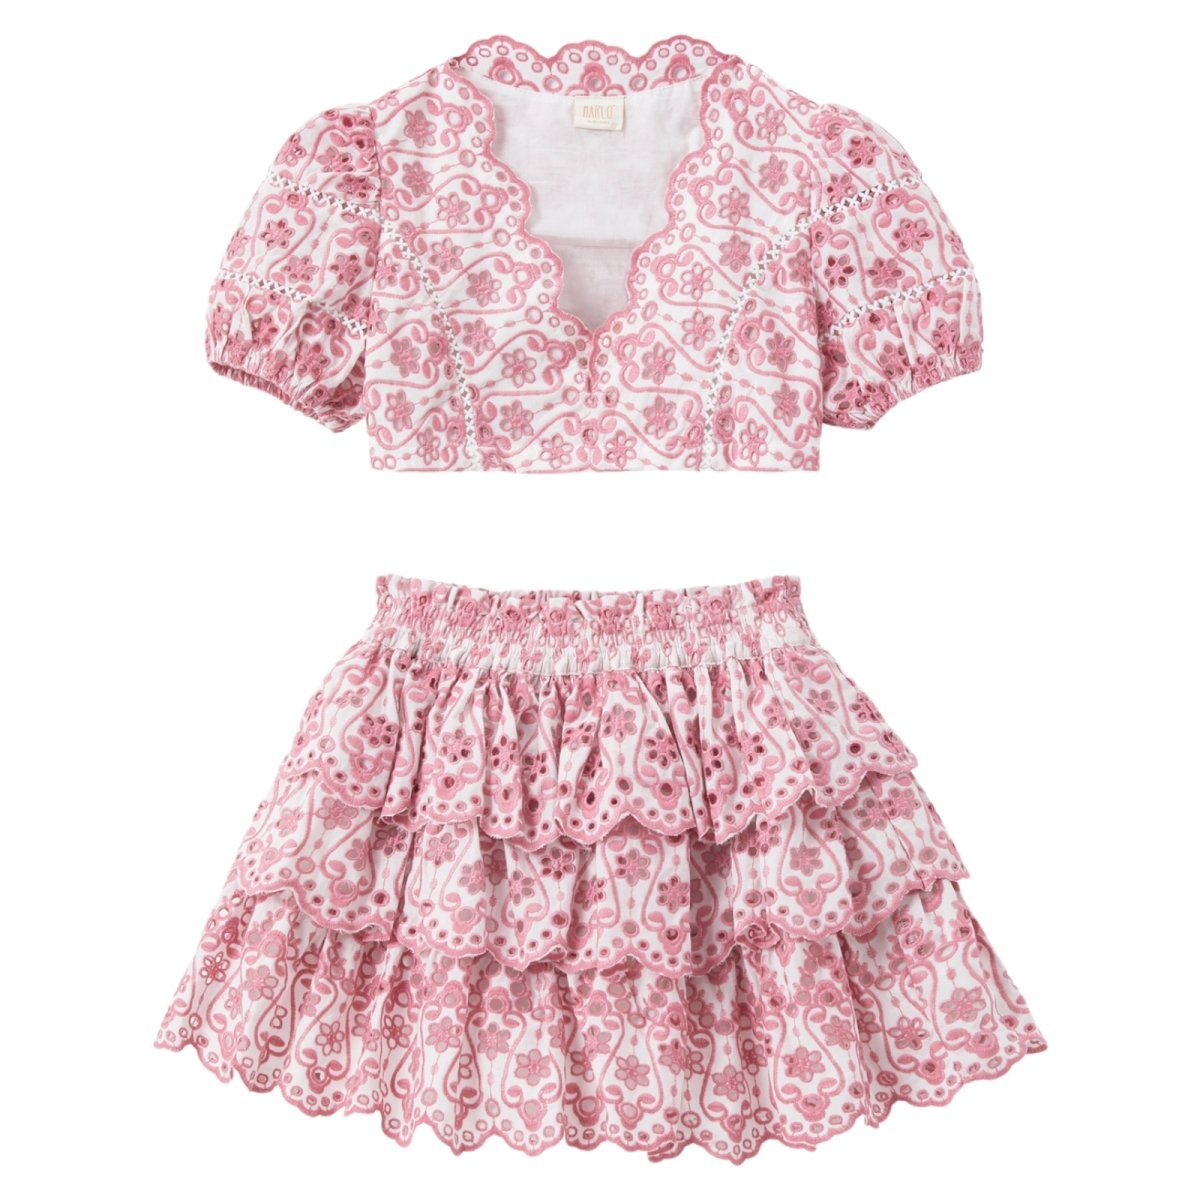 MARGAUX EMBROIDERED CROP TOP AND RUFFLE SKIRT SET - SET